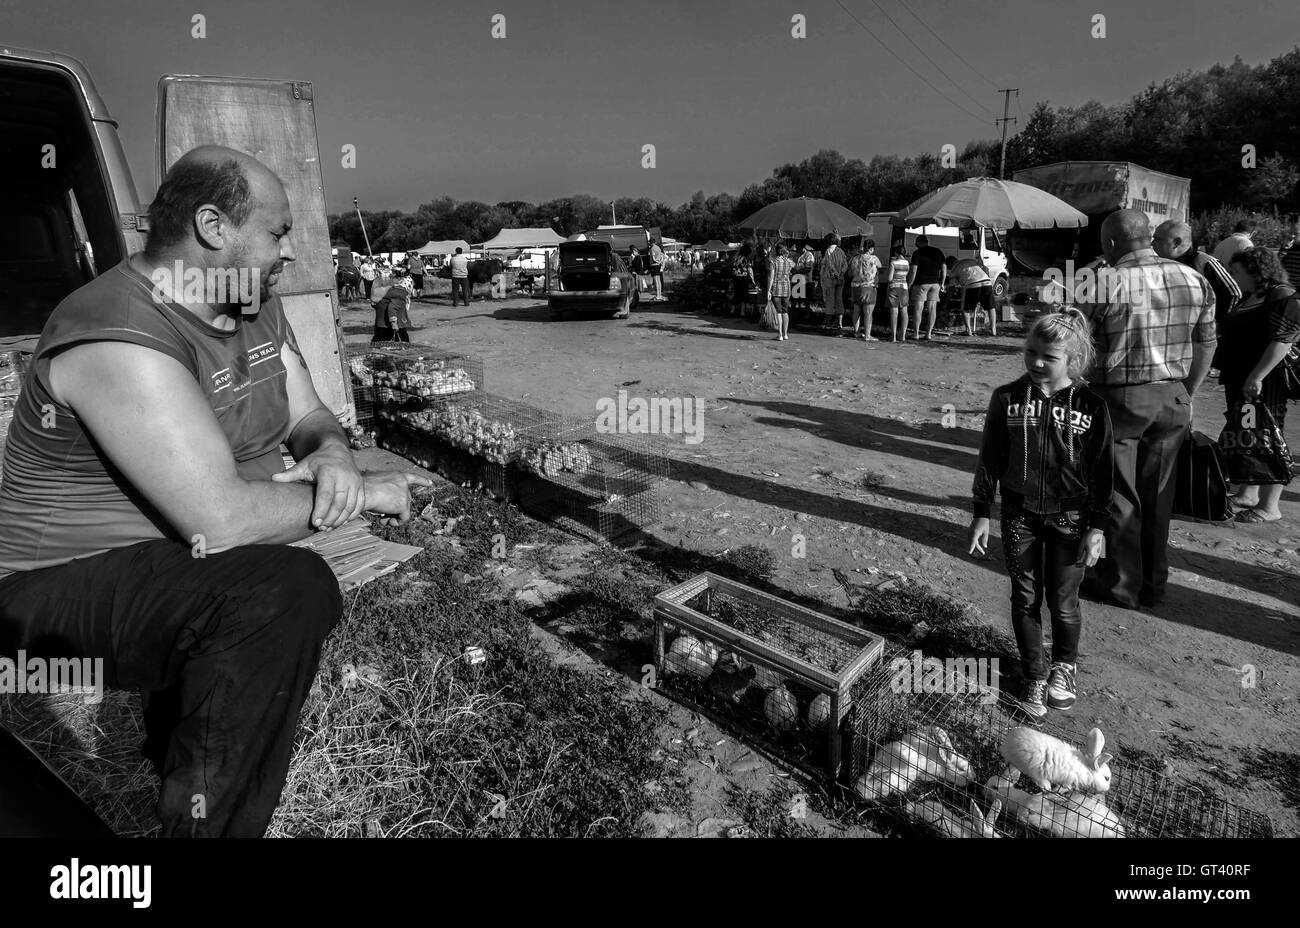 Man who sells rabbits, talking to a little boy on domestic animals market in the town of Kosov, Ivano-Frankivsk Oblast, Ukraine Stock Photo